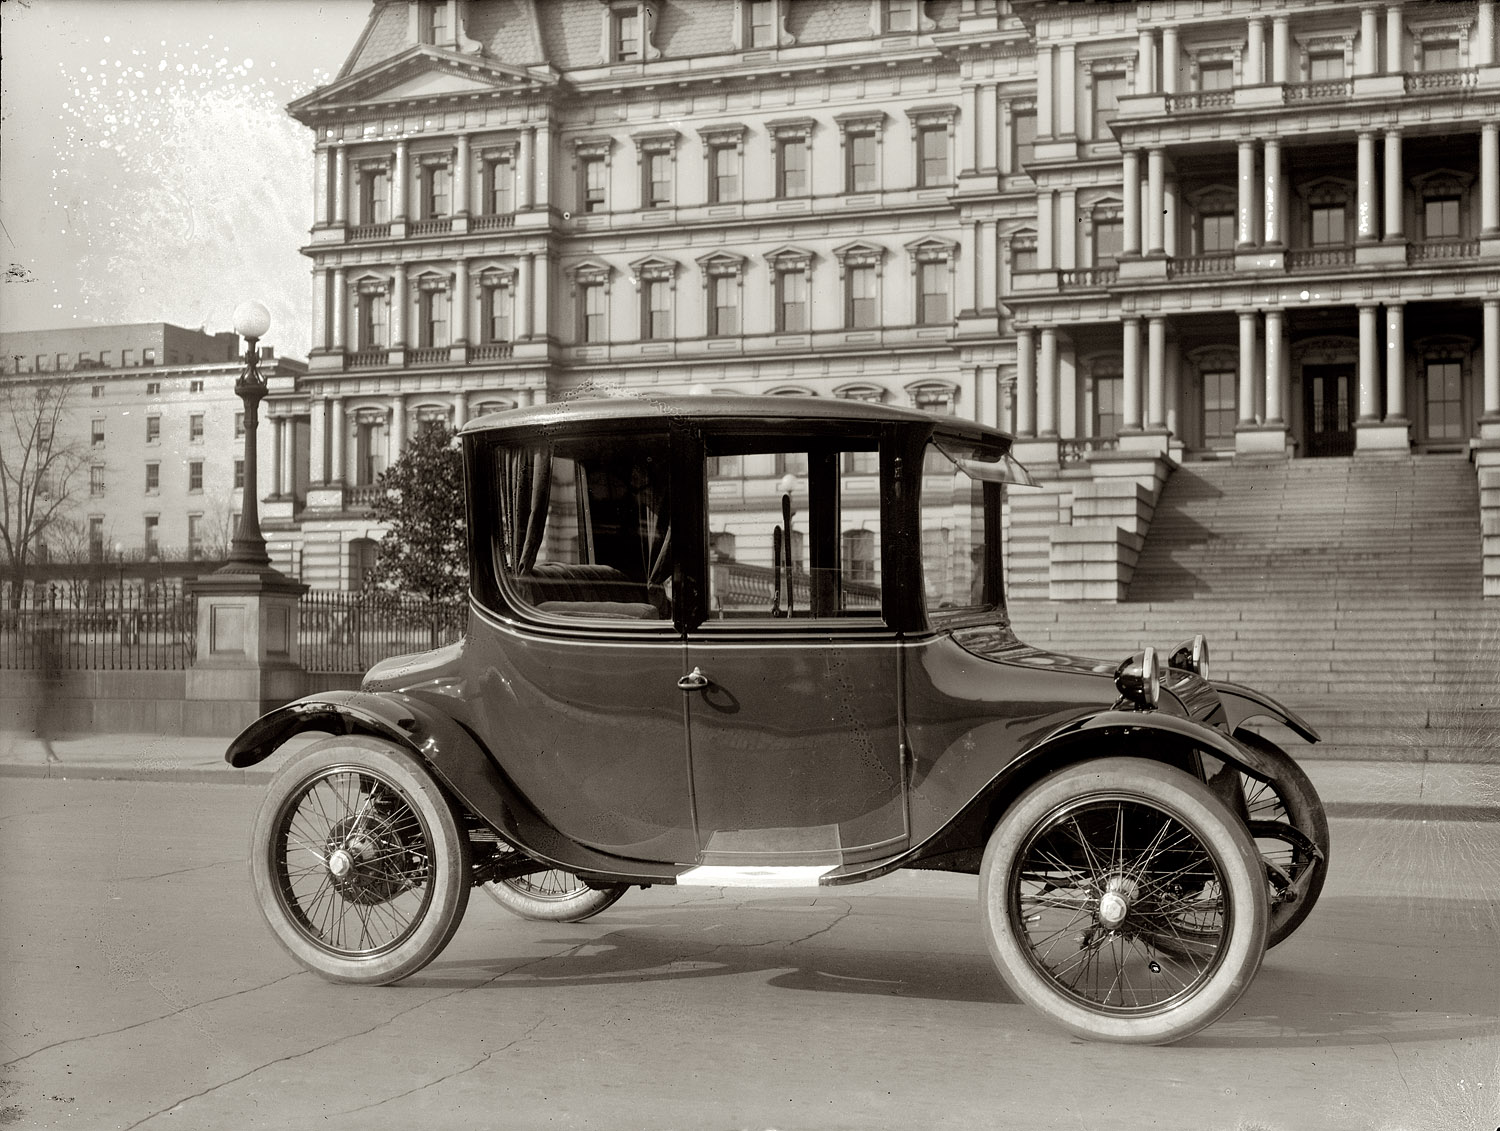 1921 or 1922. "Detroit Electric car at the State, War and Navy building in Washington." View full size. National Photo Company Collection.